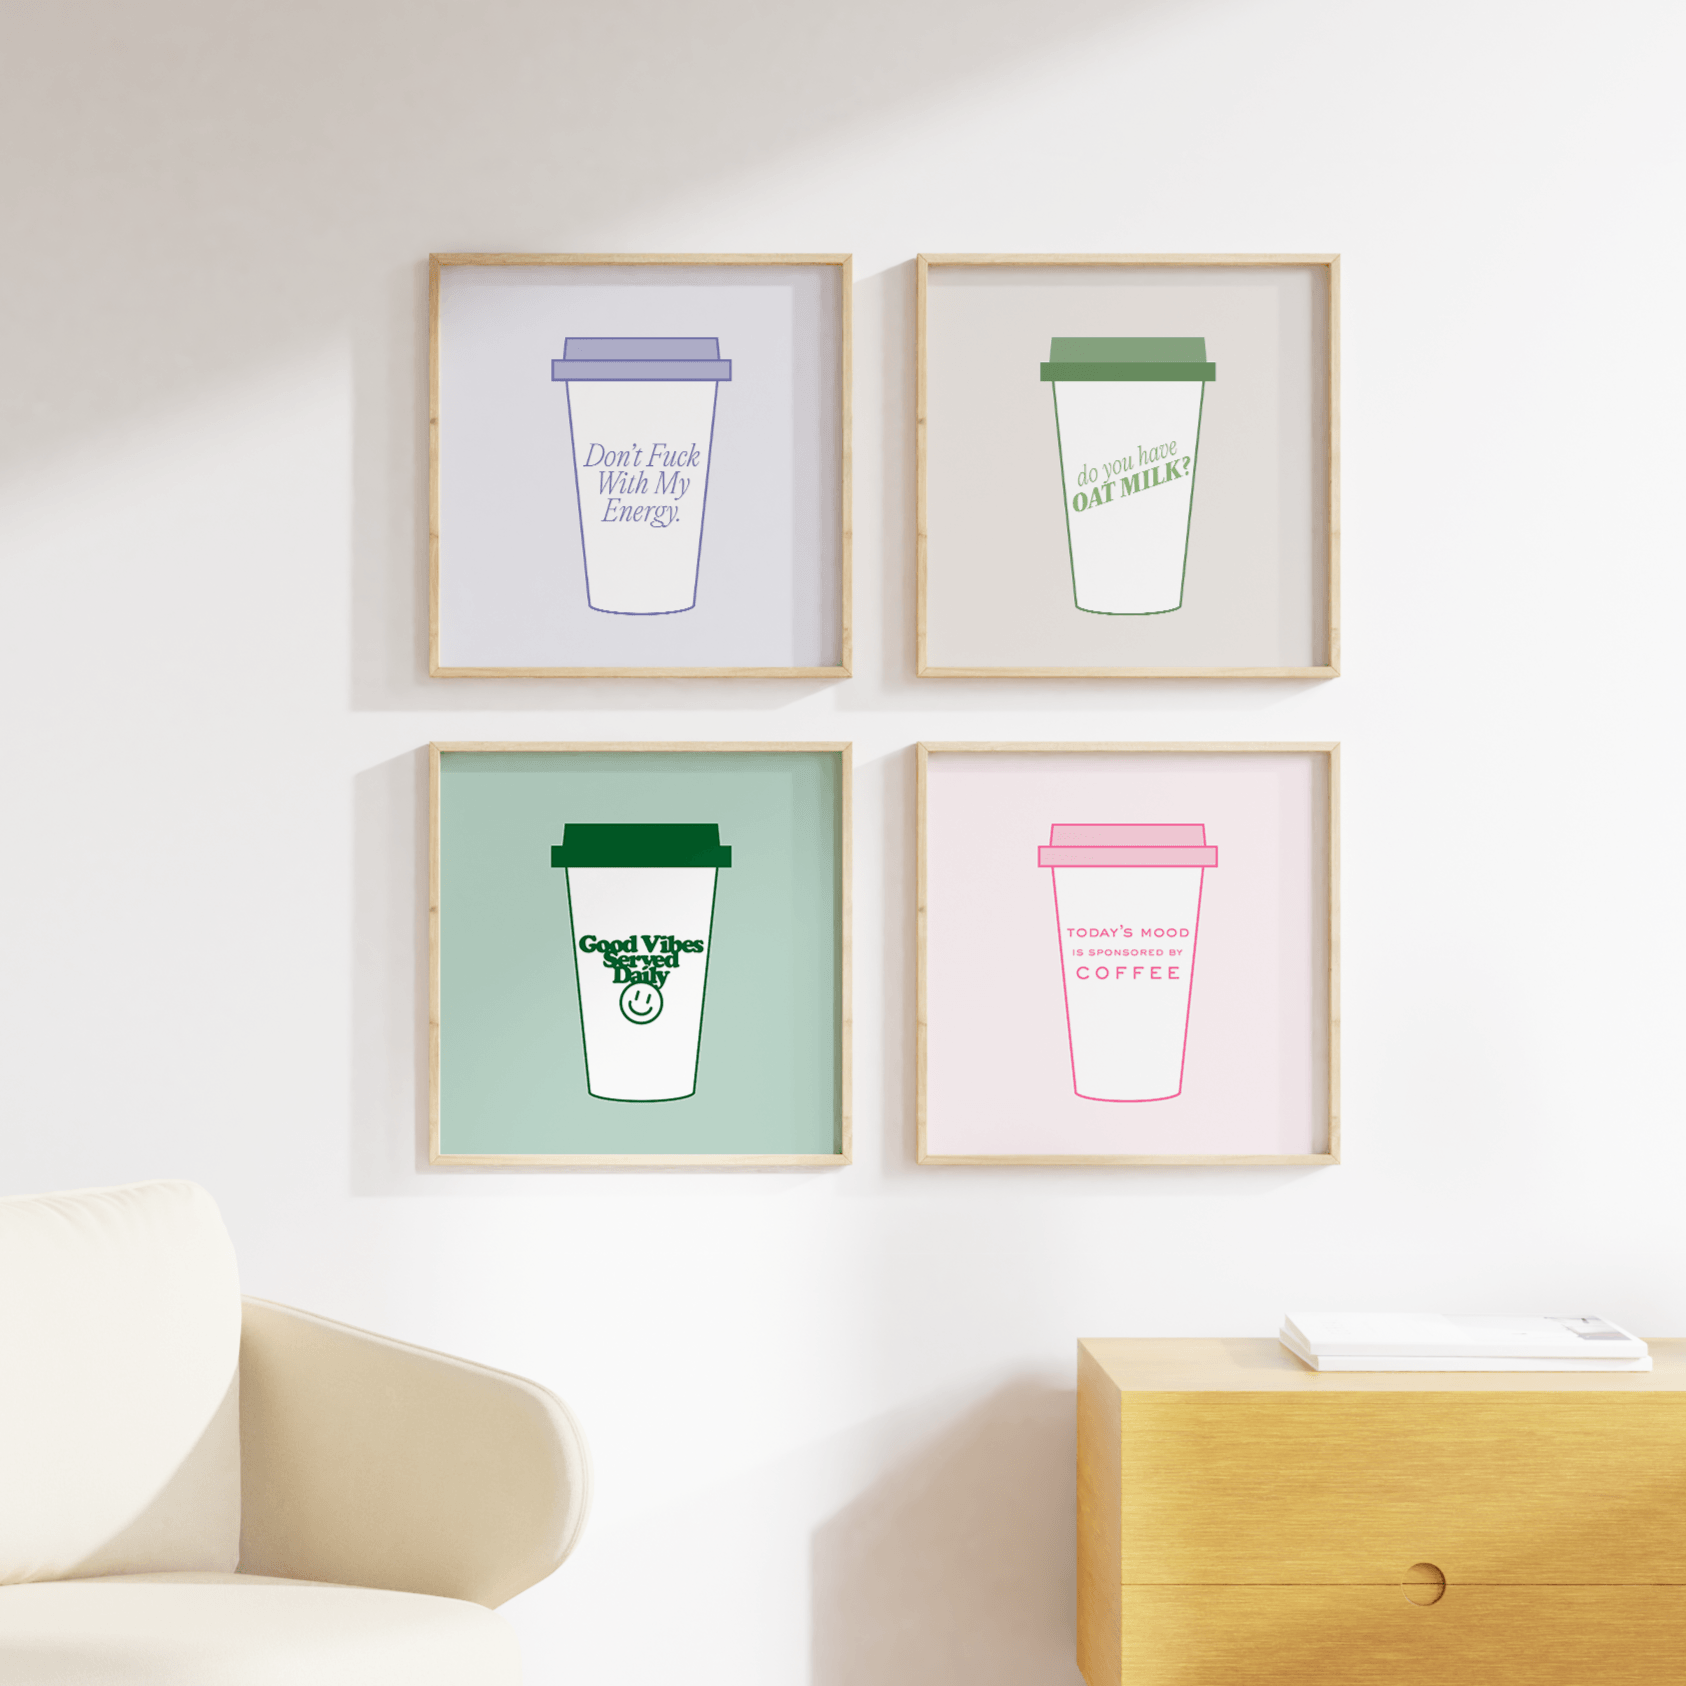 Don't F*ck With My Energy Coffee Print - THE WALL SNOB